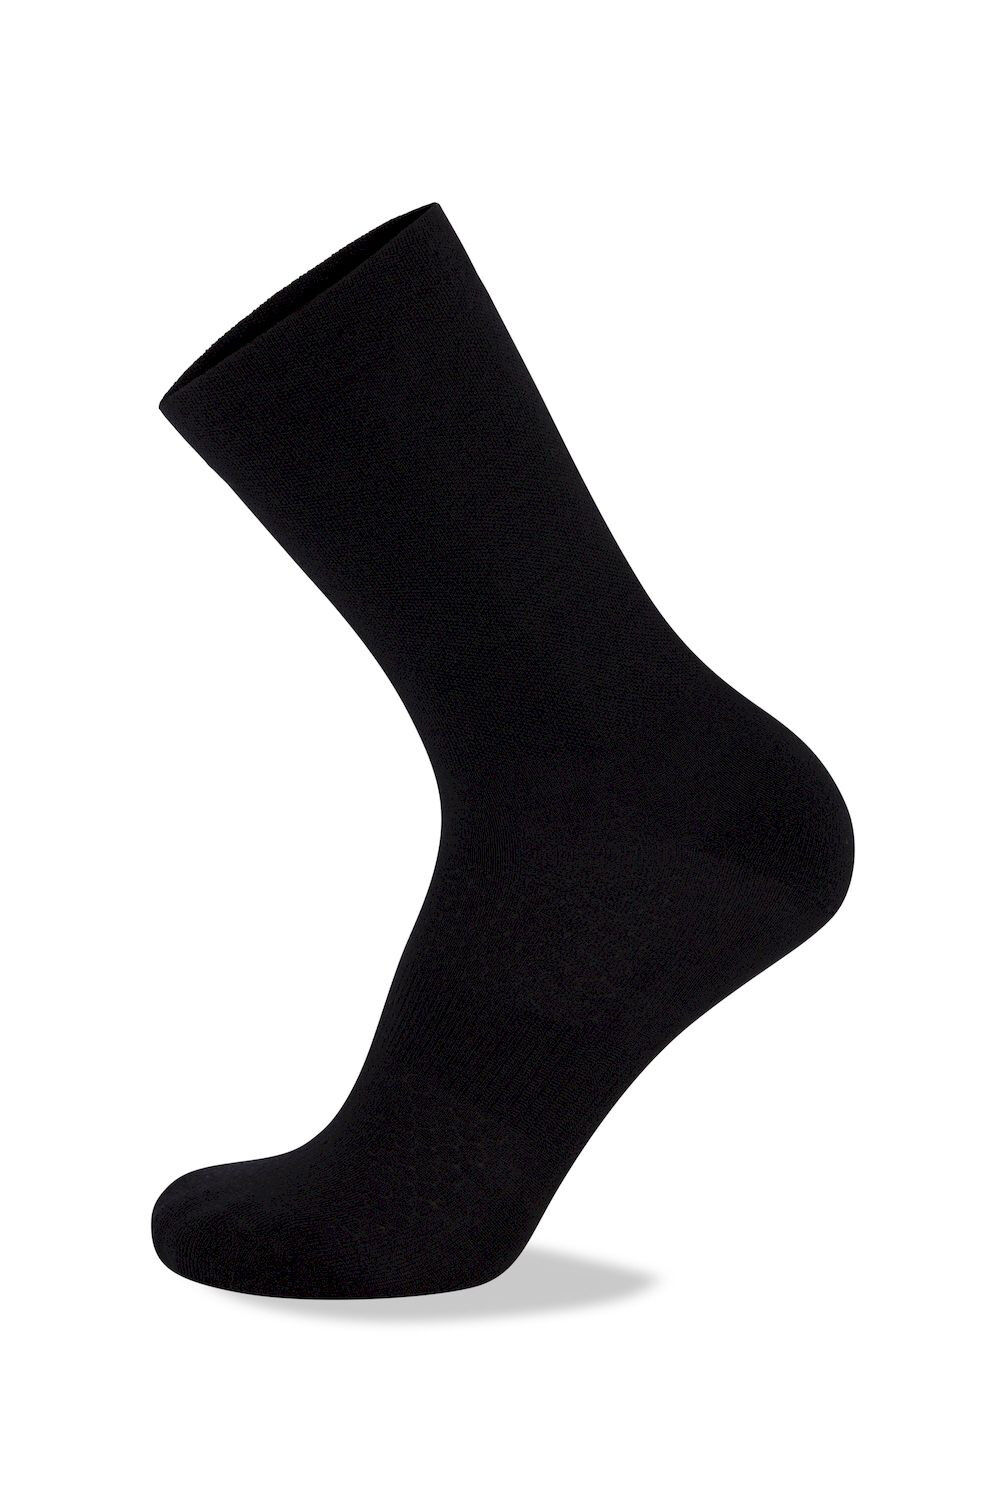 Mons Royale Atlas Crew Sock - Calcetines ciclismo